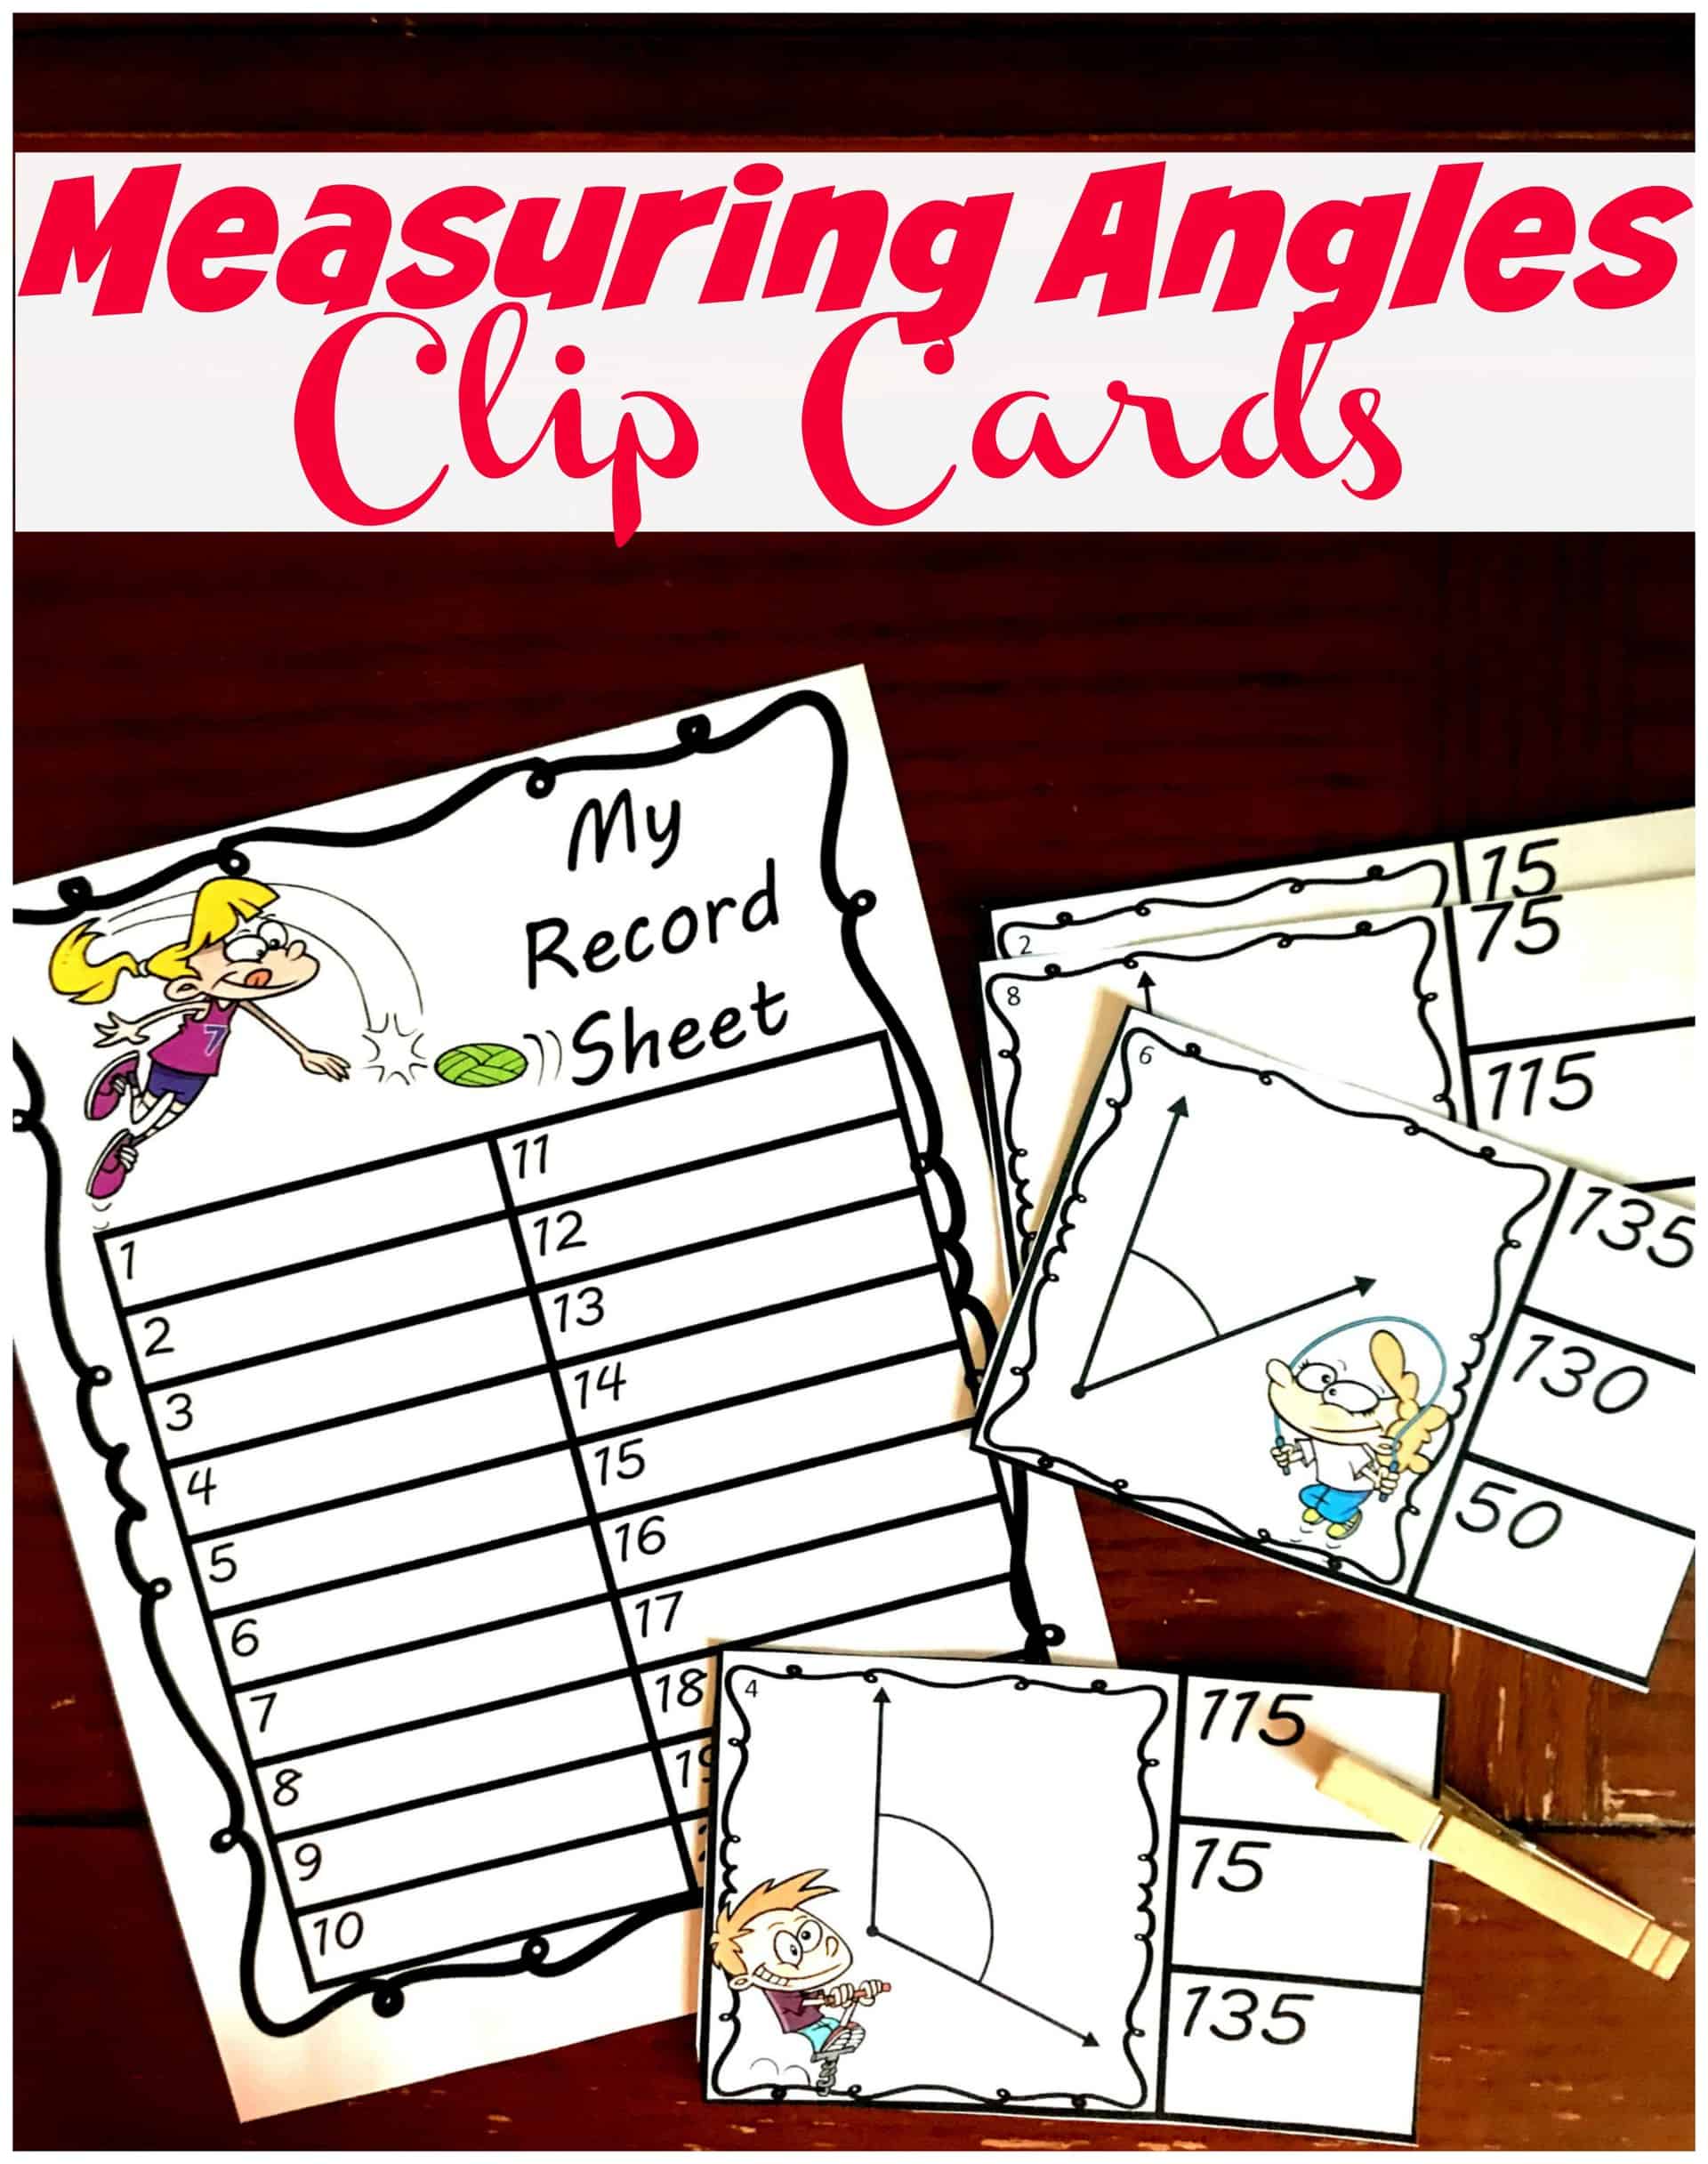 Your children will love measuring angles with these fun clip cards. Grab these 20 clip cards today and get in some angle measuring practice.